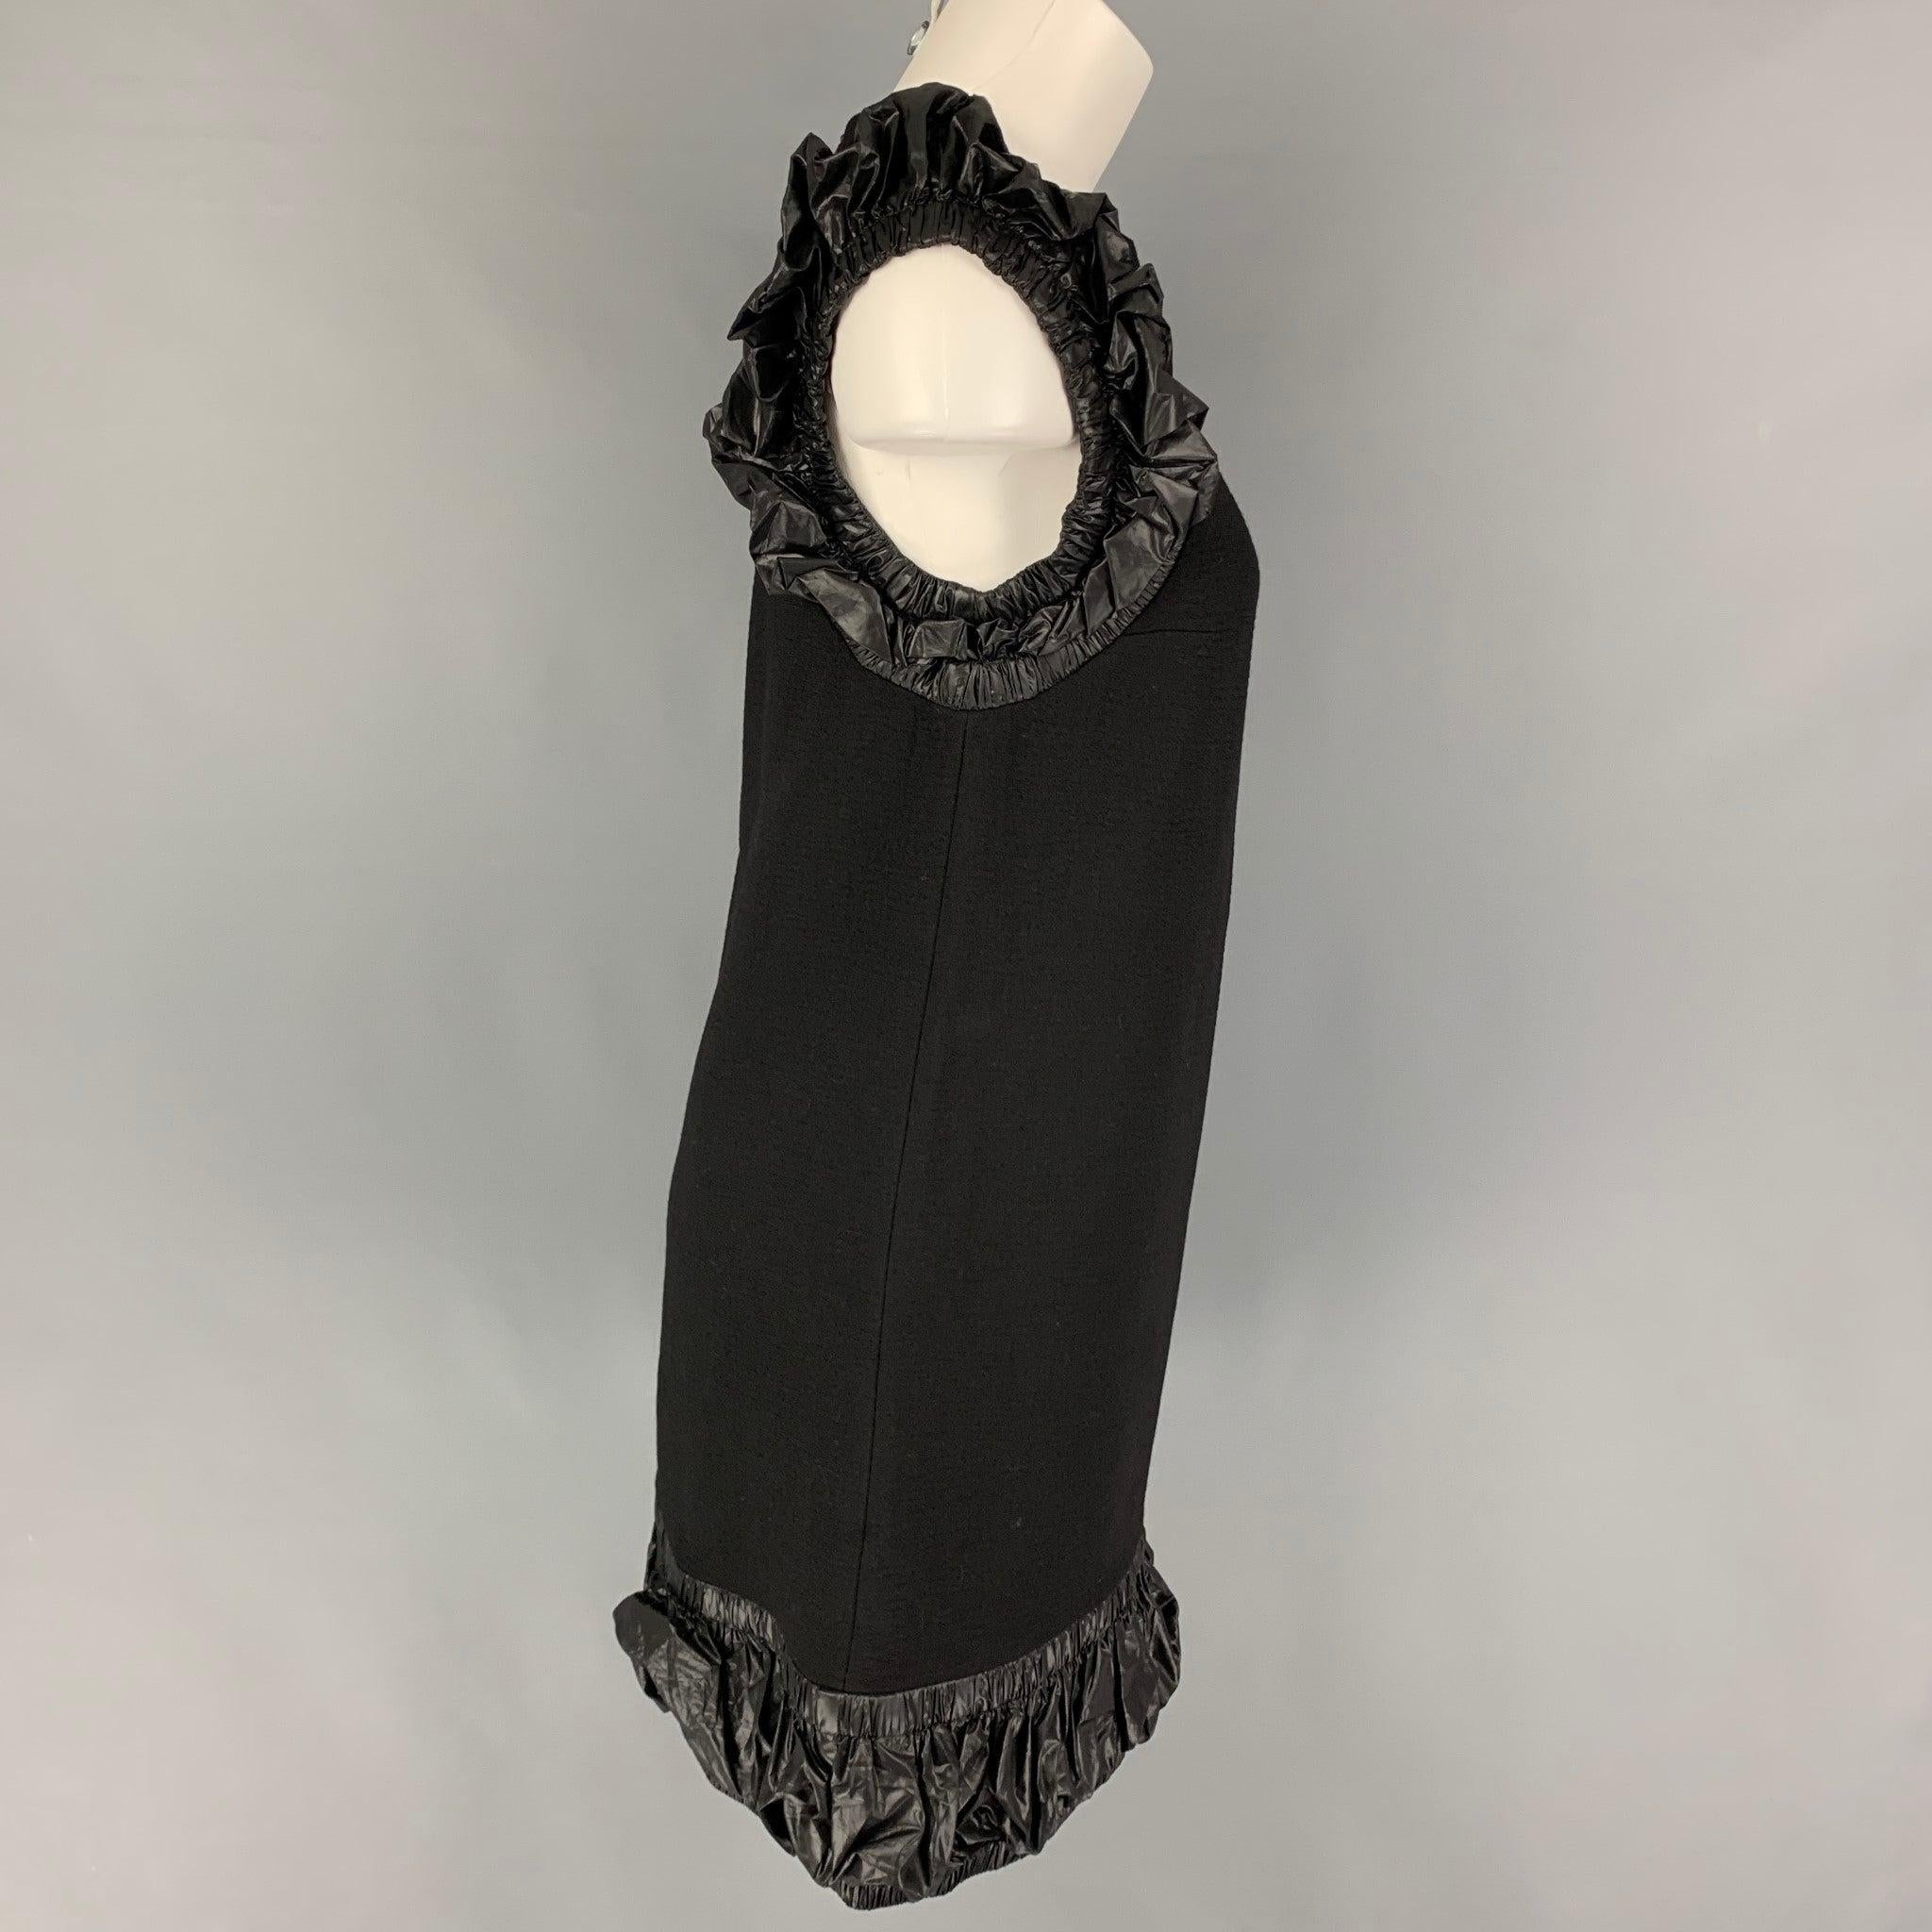 CHRISTOPHER KANE dress comes in a black polyester featuring a shift style, ruffled elastic hem, sleeveless, and a back zipper closure. Made in Italy.
Very Good
Pre-Owned Condition. 

Marked:   UK 8 / US 4 / EU 36 

Measurements: 
 
Shoulder: 16.5